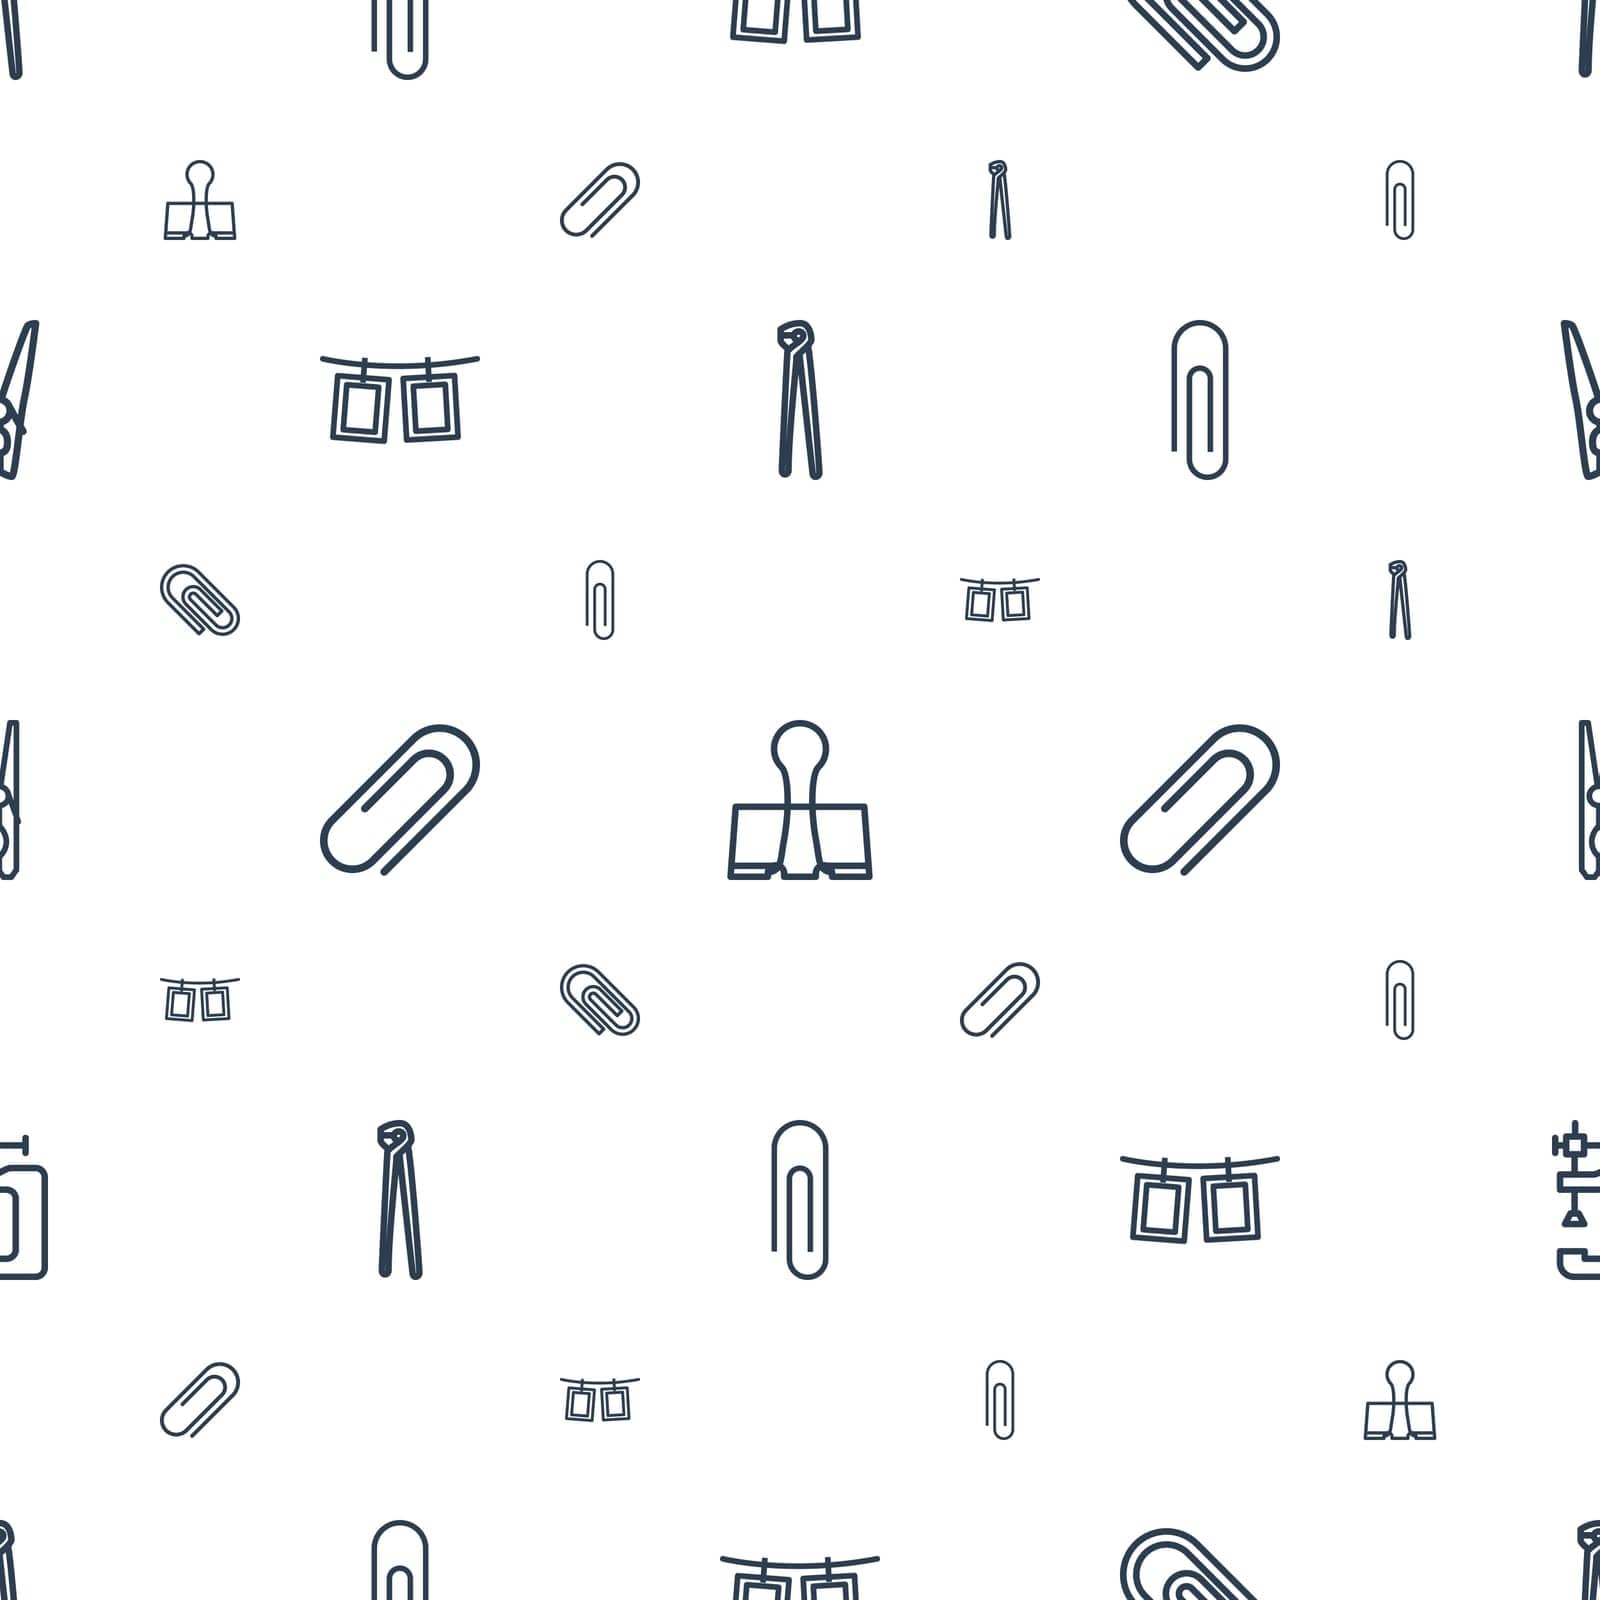 symbol,steel,hang,education,concept,document,rope,pattern,icon,sign,isolated,pins,office,photos,hold,peg,pin,white,paper,school,laundry,design,pliers,vector,clamp,element,on,vice,business,tool,clothespin,background,silhouette,illustration,clip,object,cloth